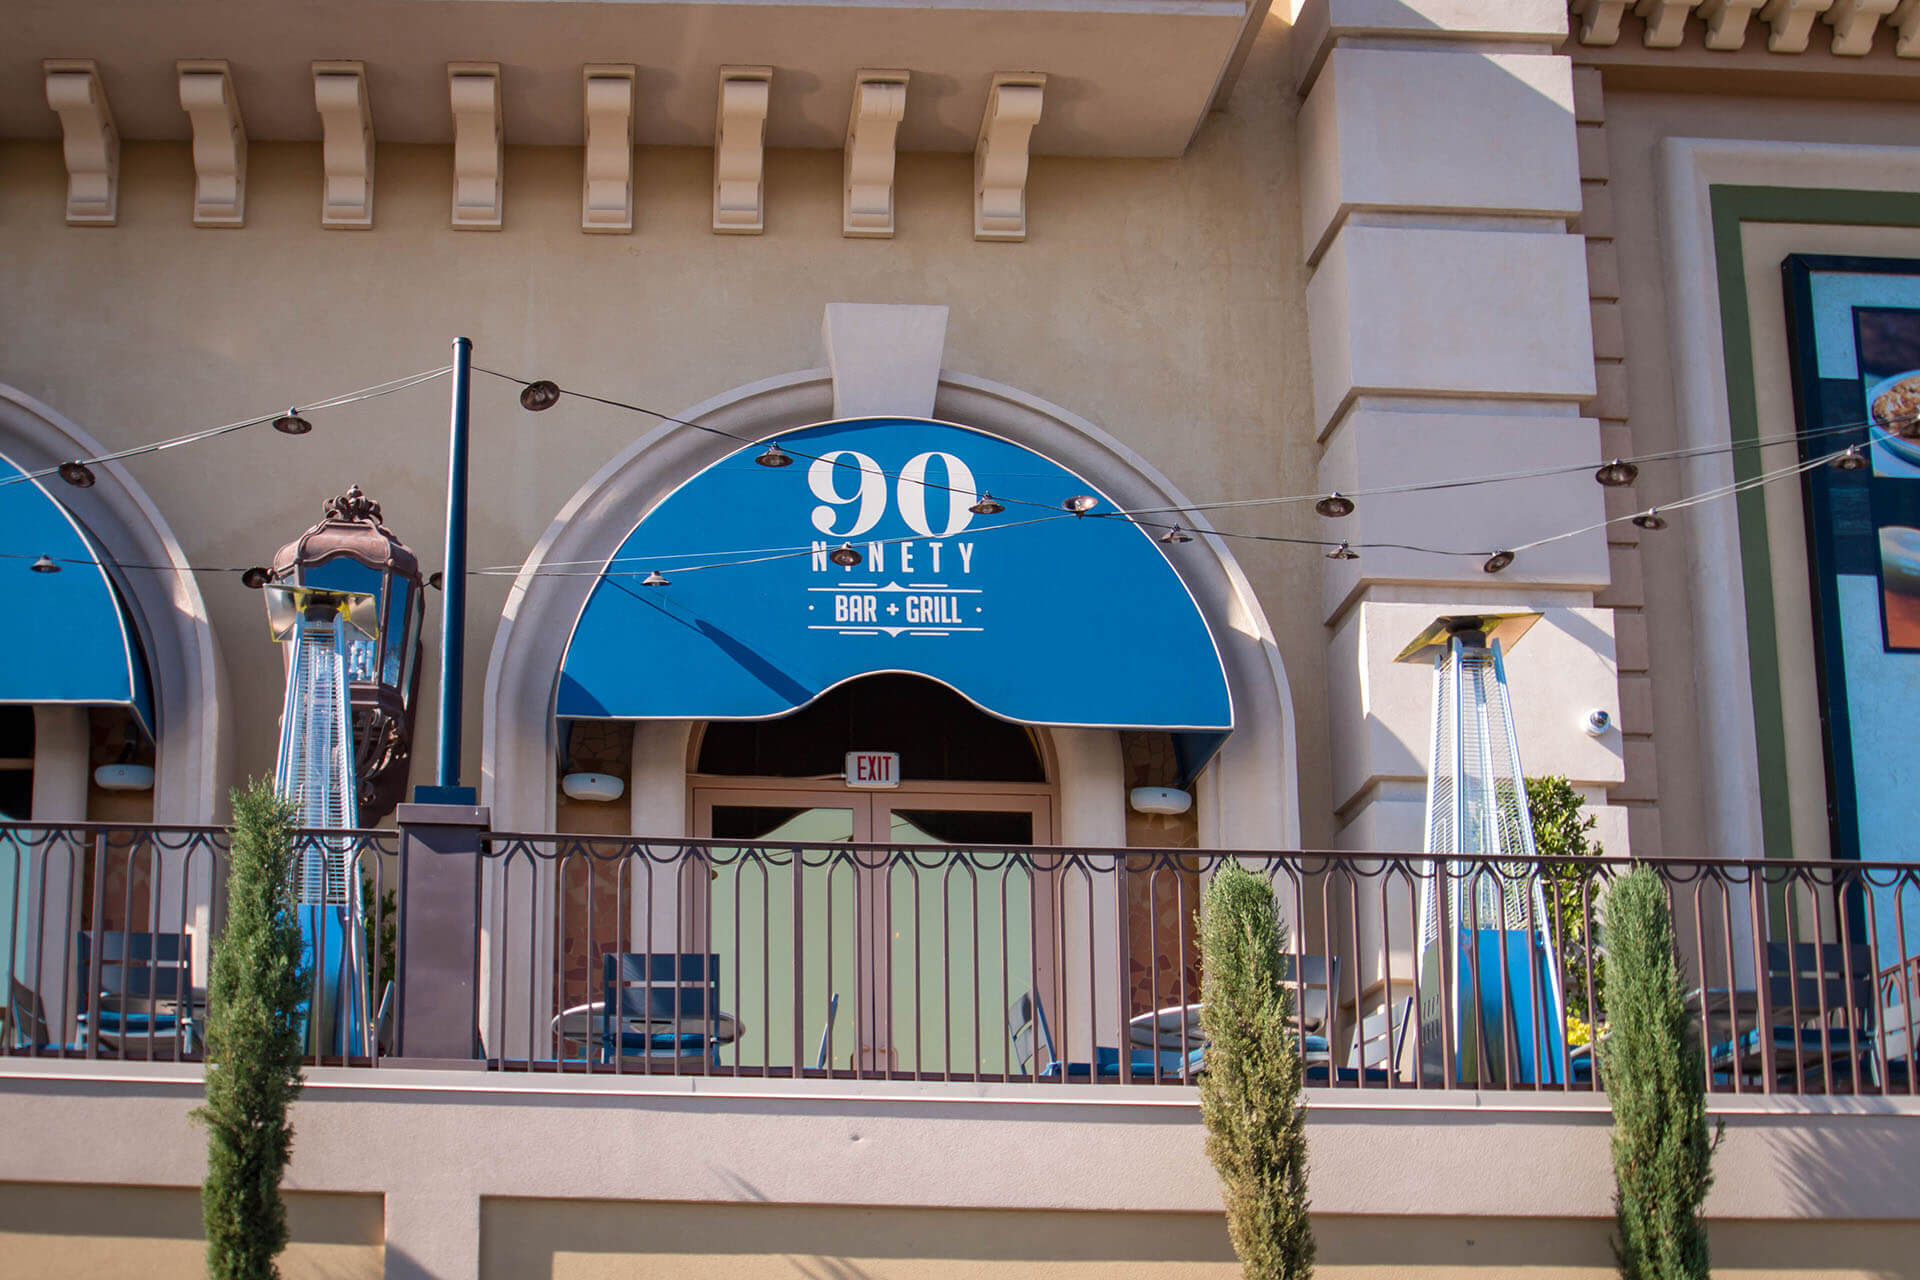 90-Ninety at Suncoast Casino in Las Vegas, Nevada - Awnings by Metro Awnings of Southern Nevada